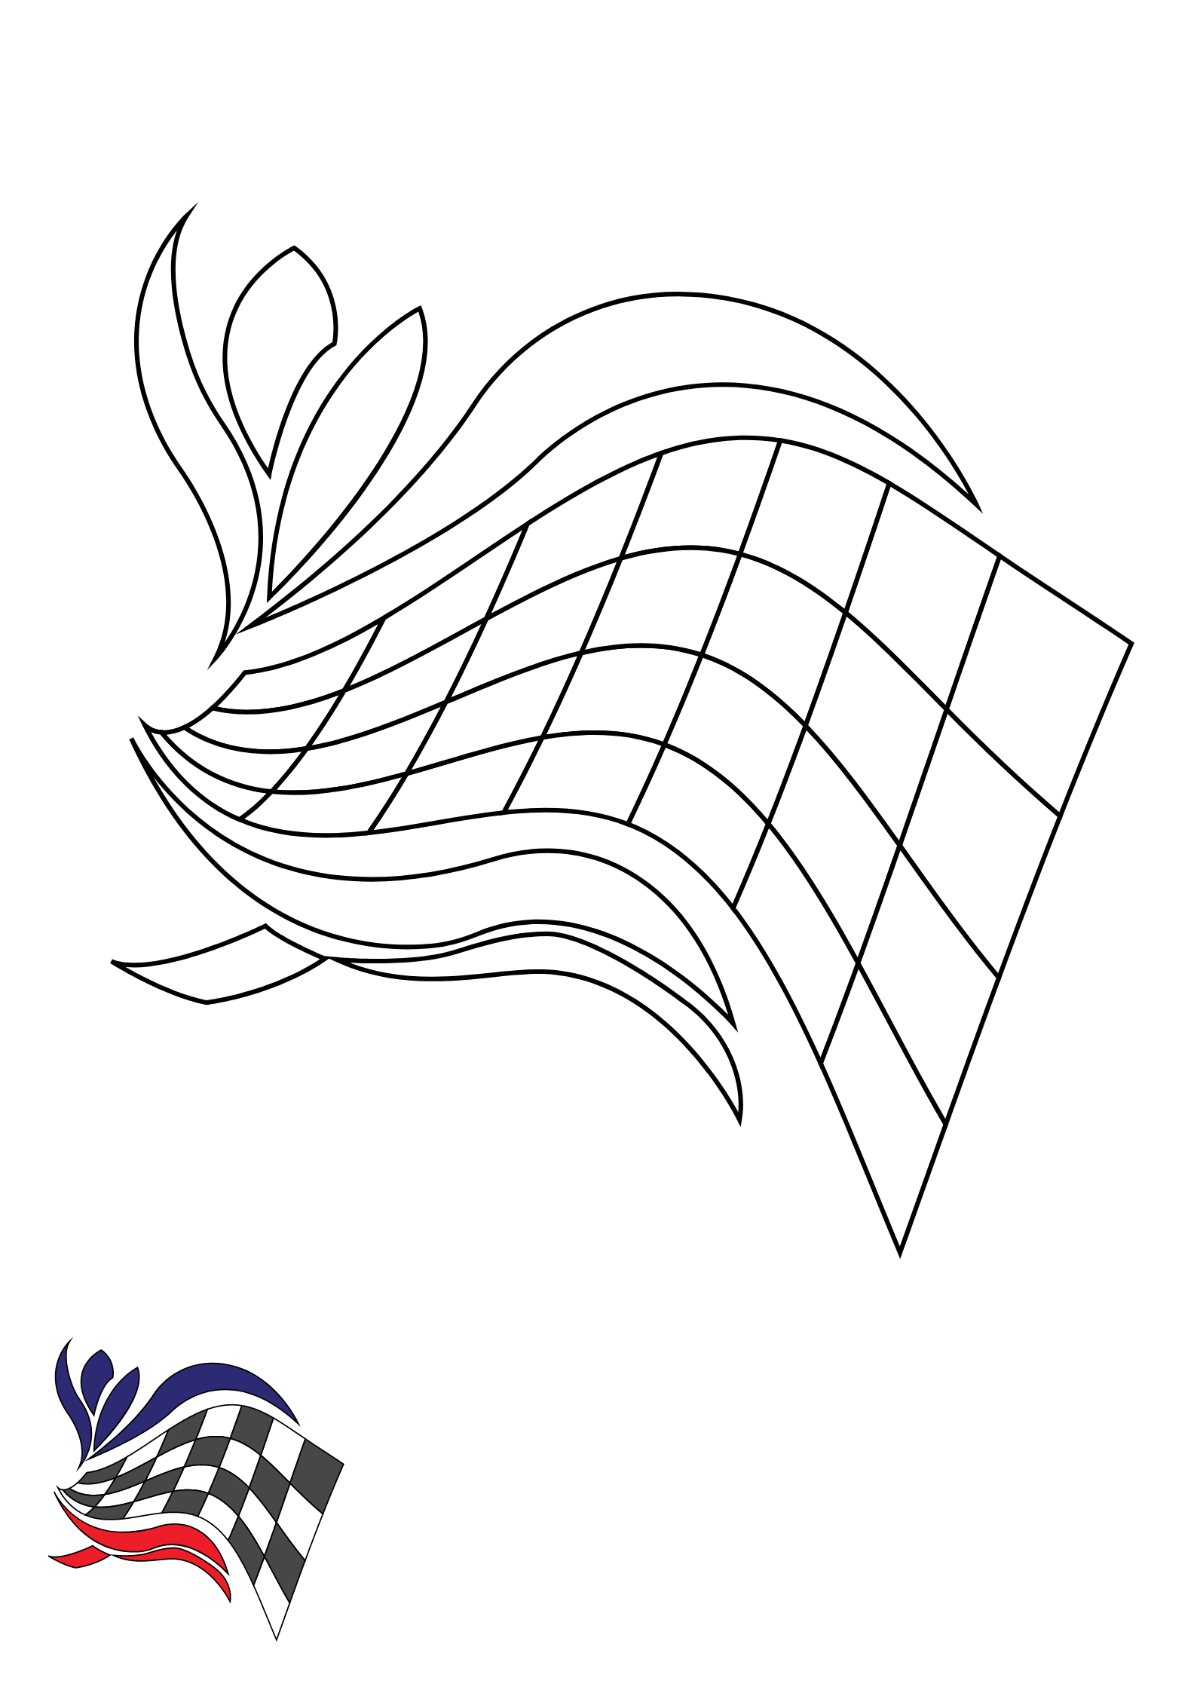 Tribal Checkered Flag coloring page